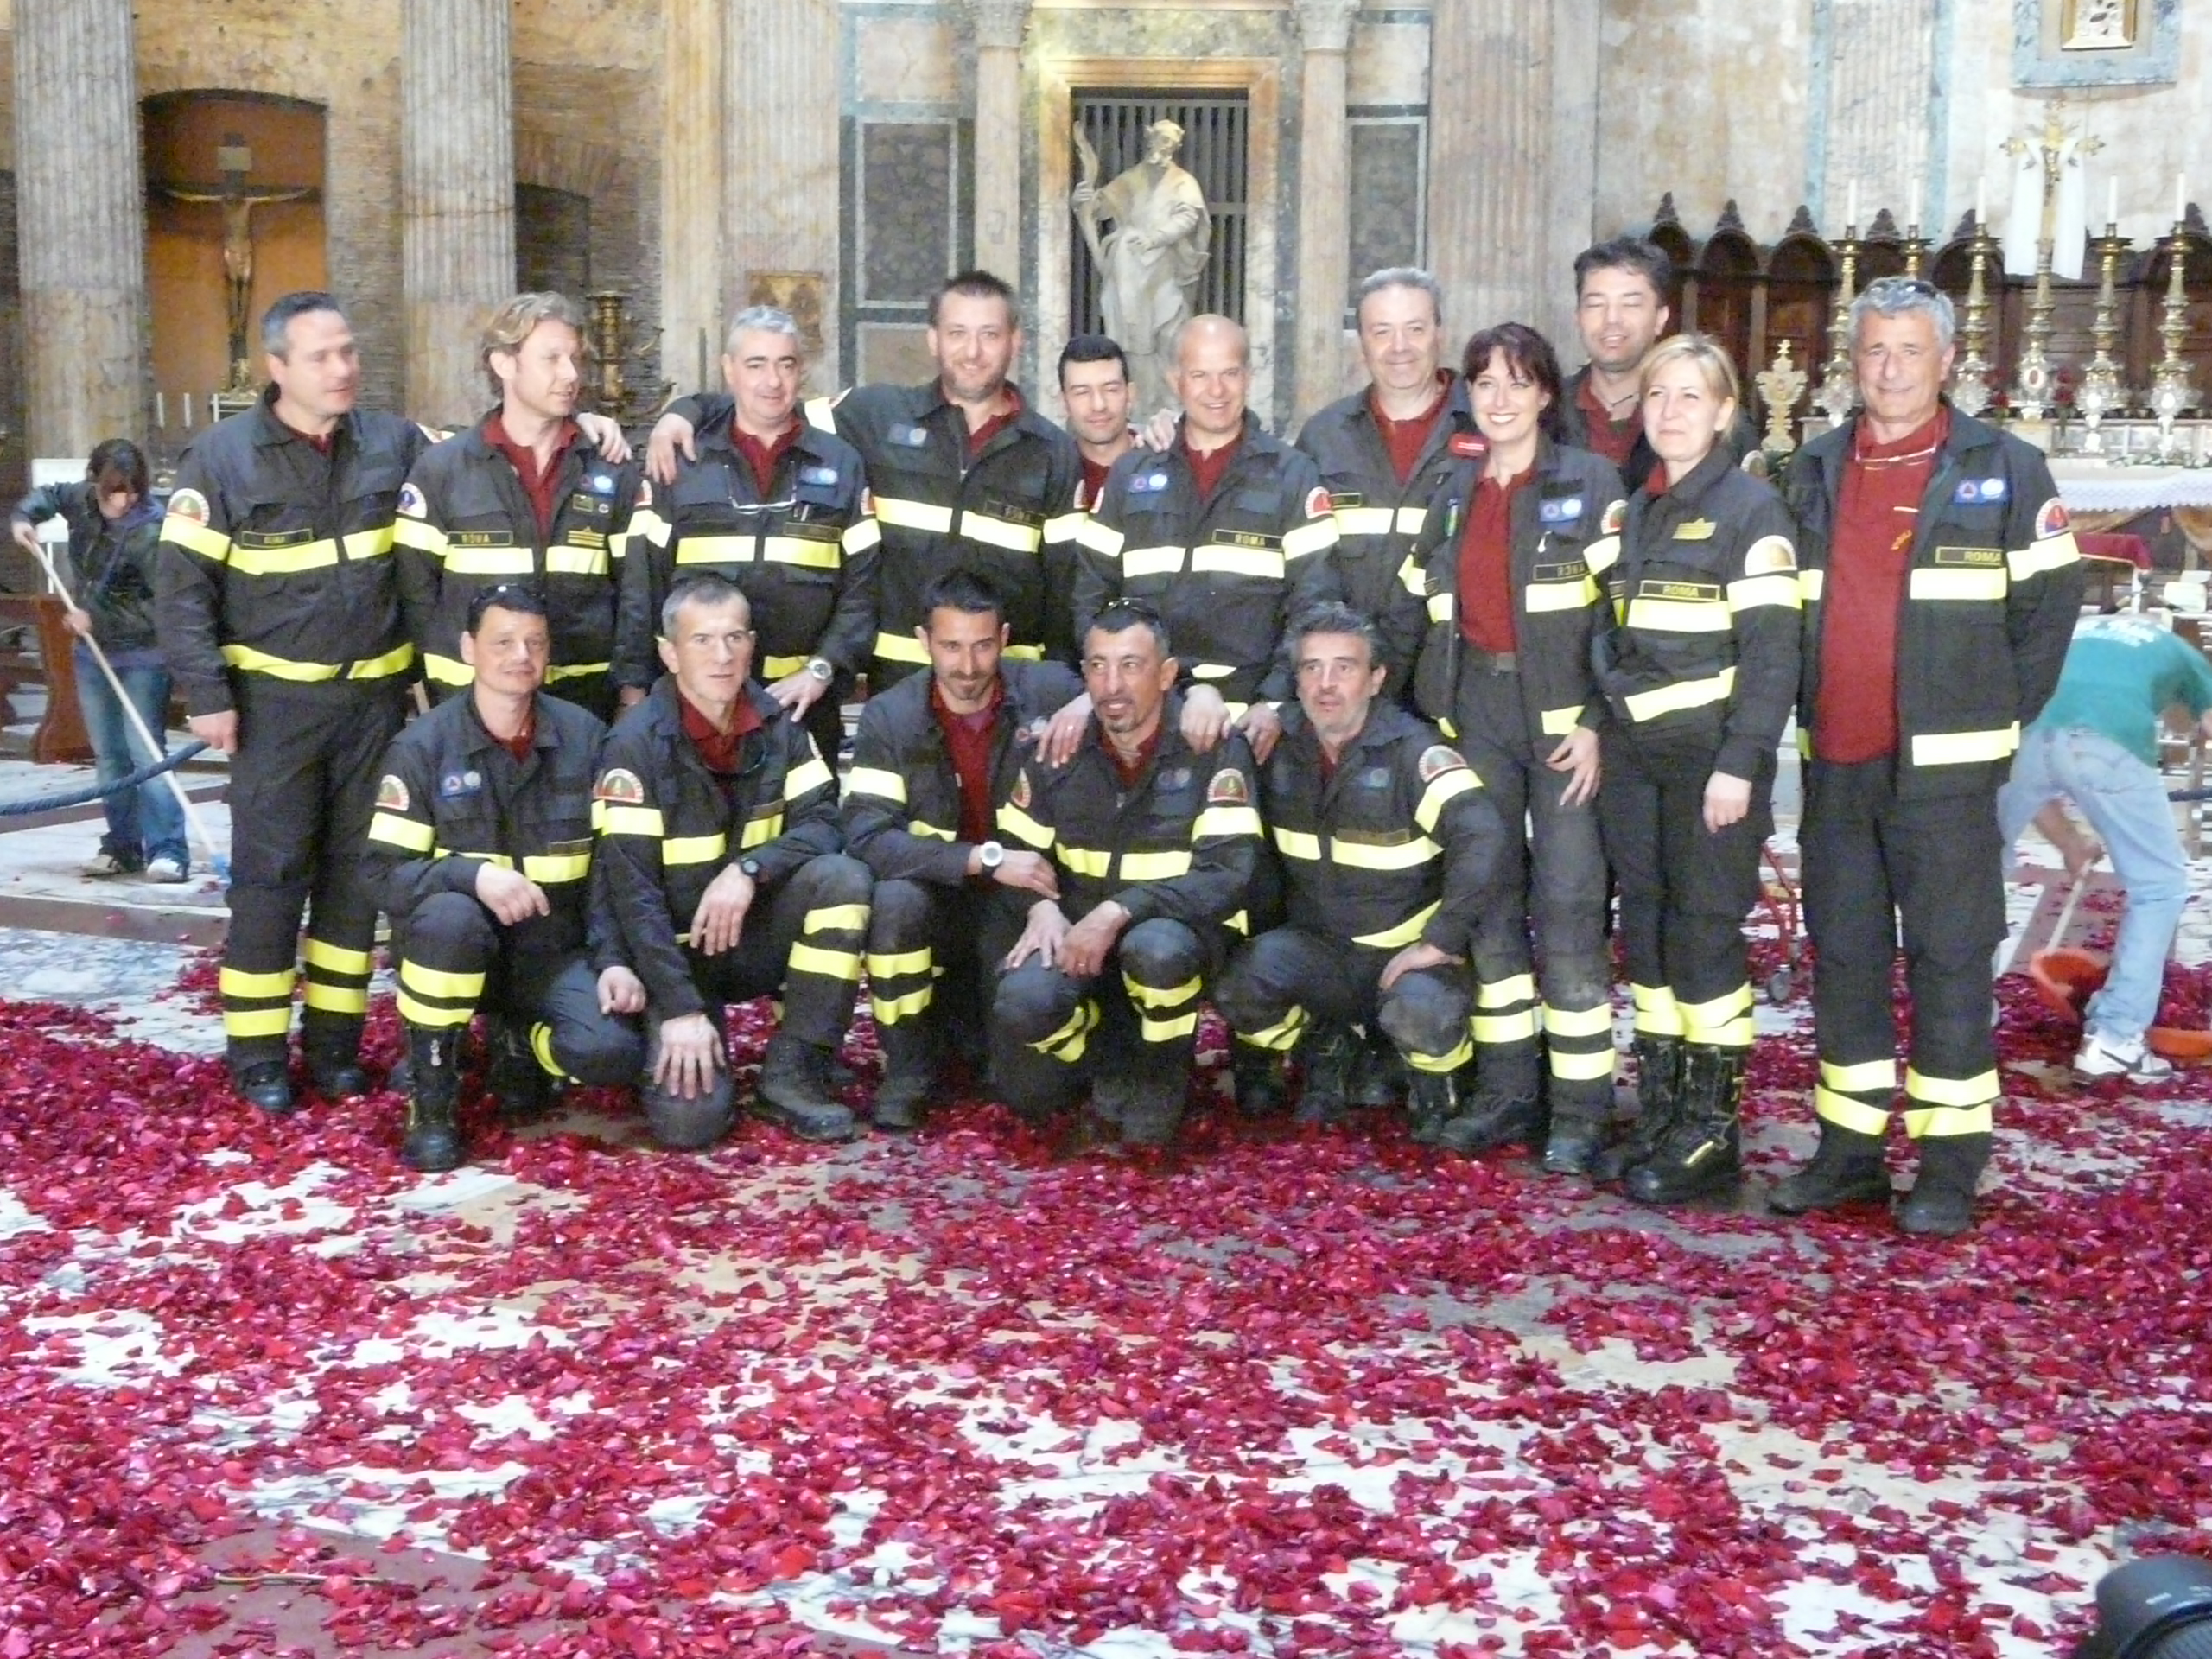 Pentecost Charismatics And Red Rose Petals At The Pantheon Pope